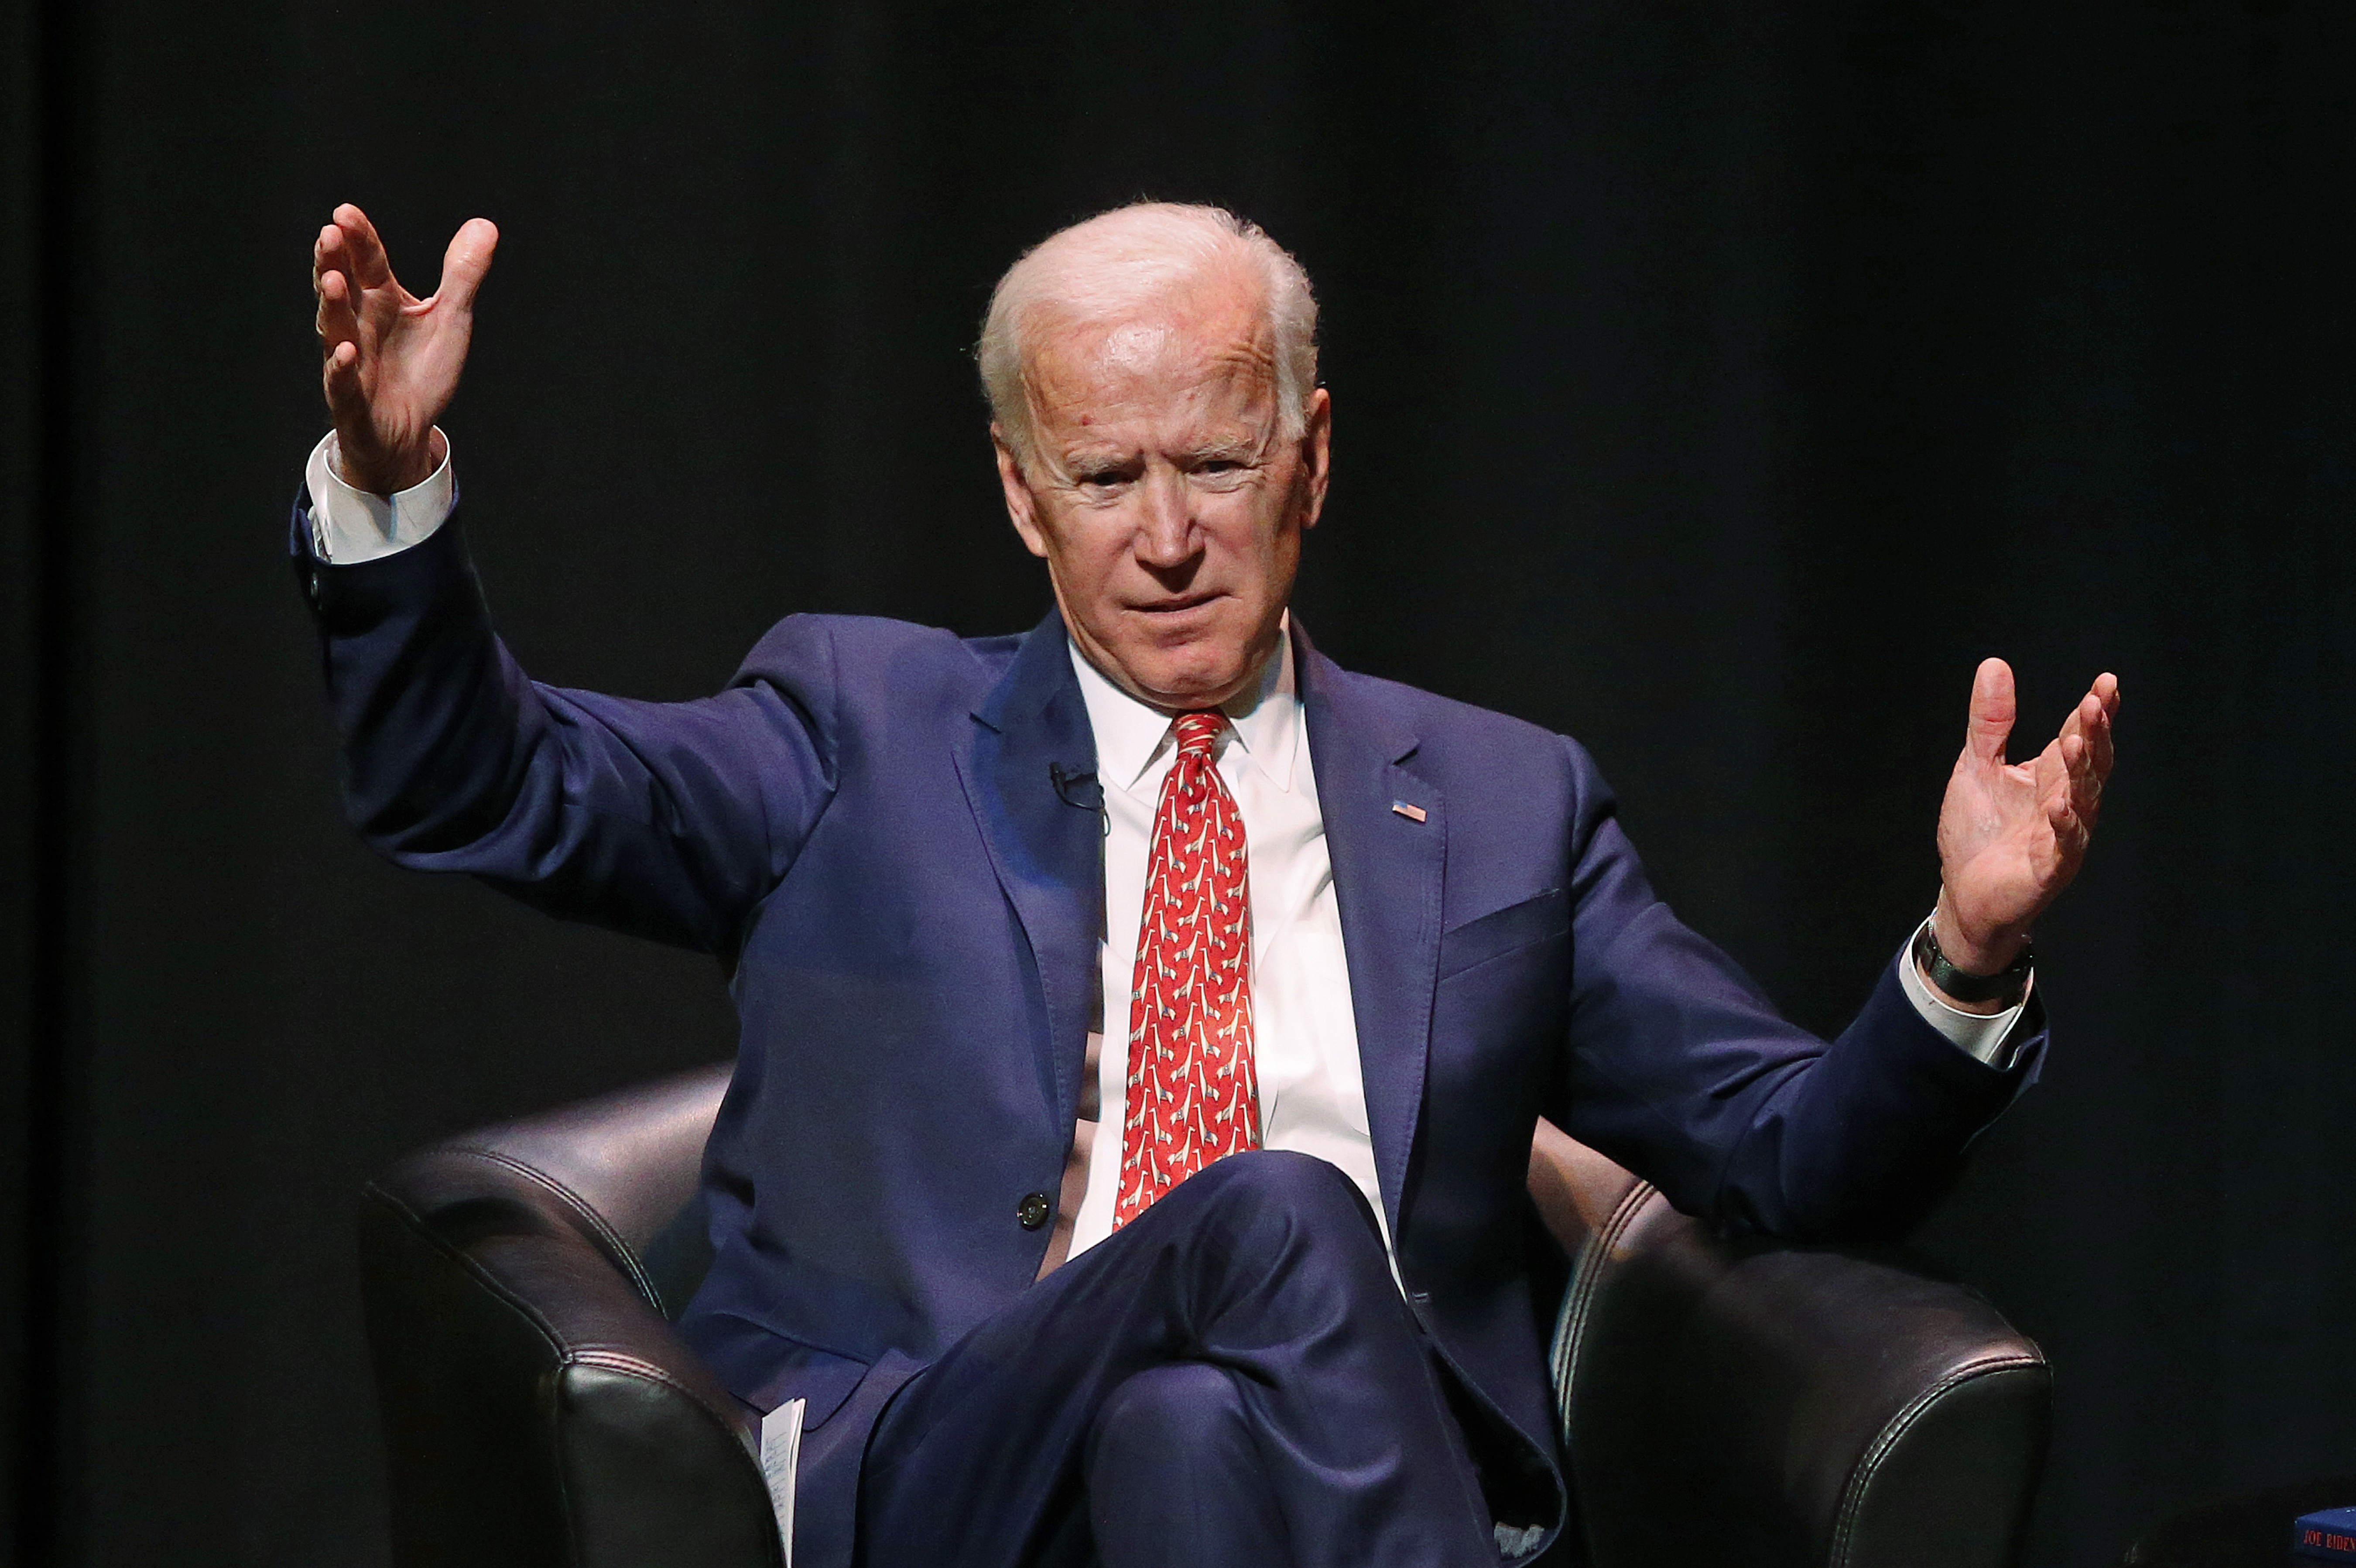 Too old to run? Biden wrestles with age as he eyes 2020 run